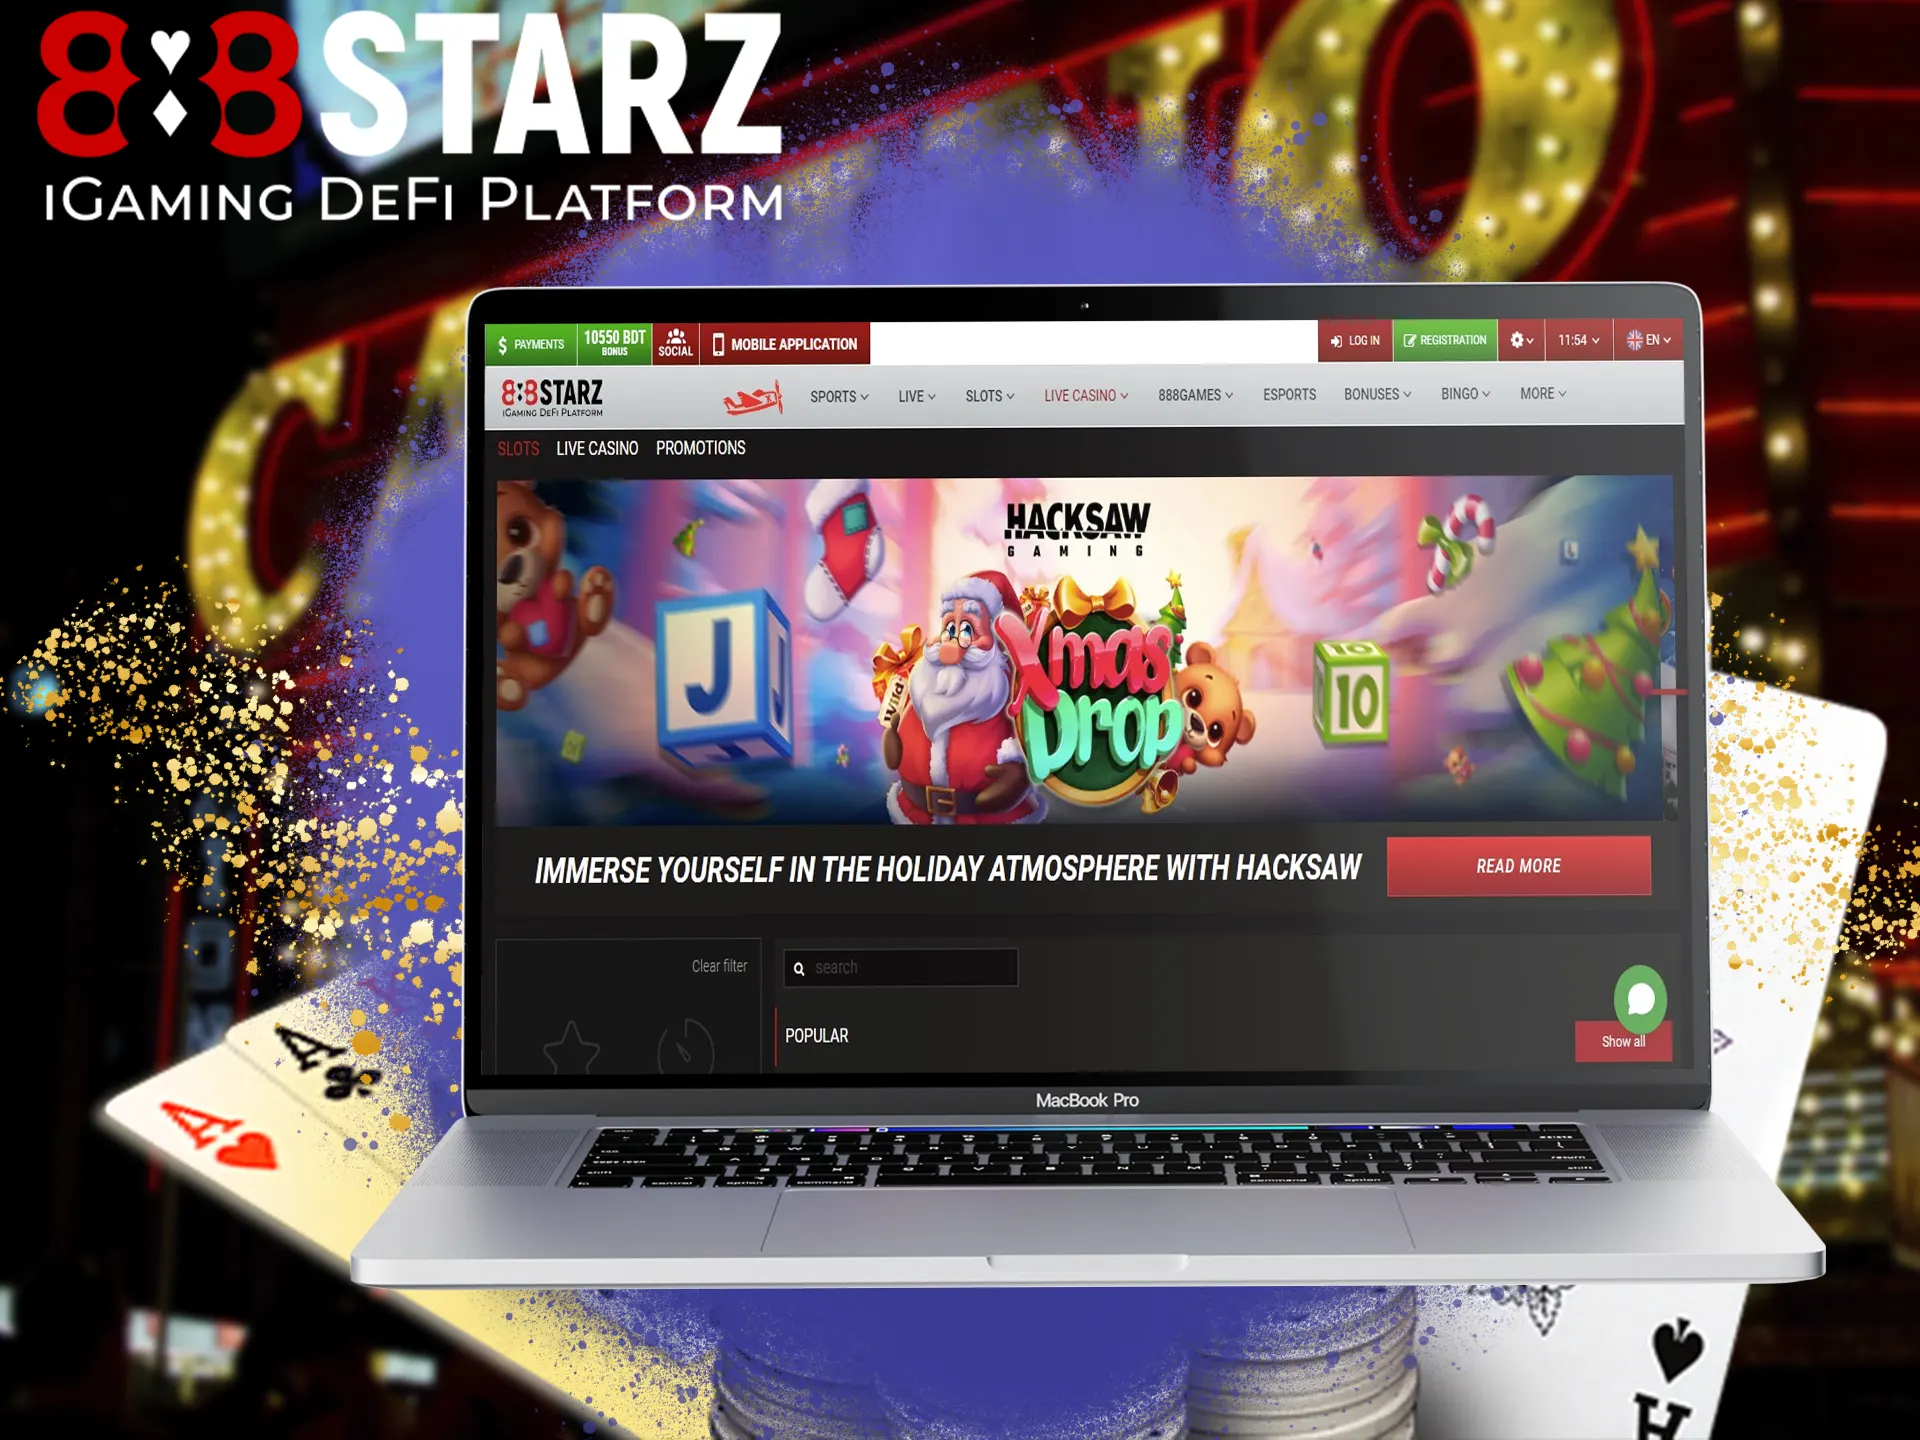 You can have a good time with the big screen of your computer, because this version of 888starz is universal and adapts to all resolutions.